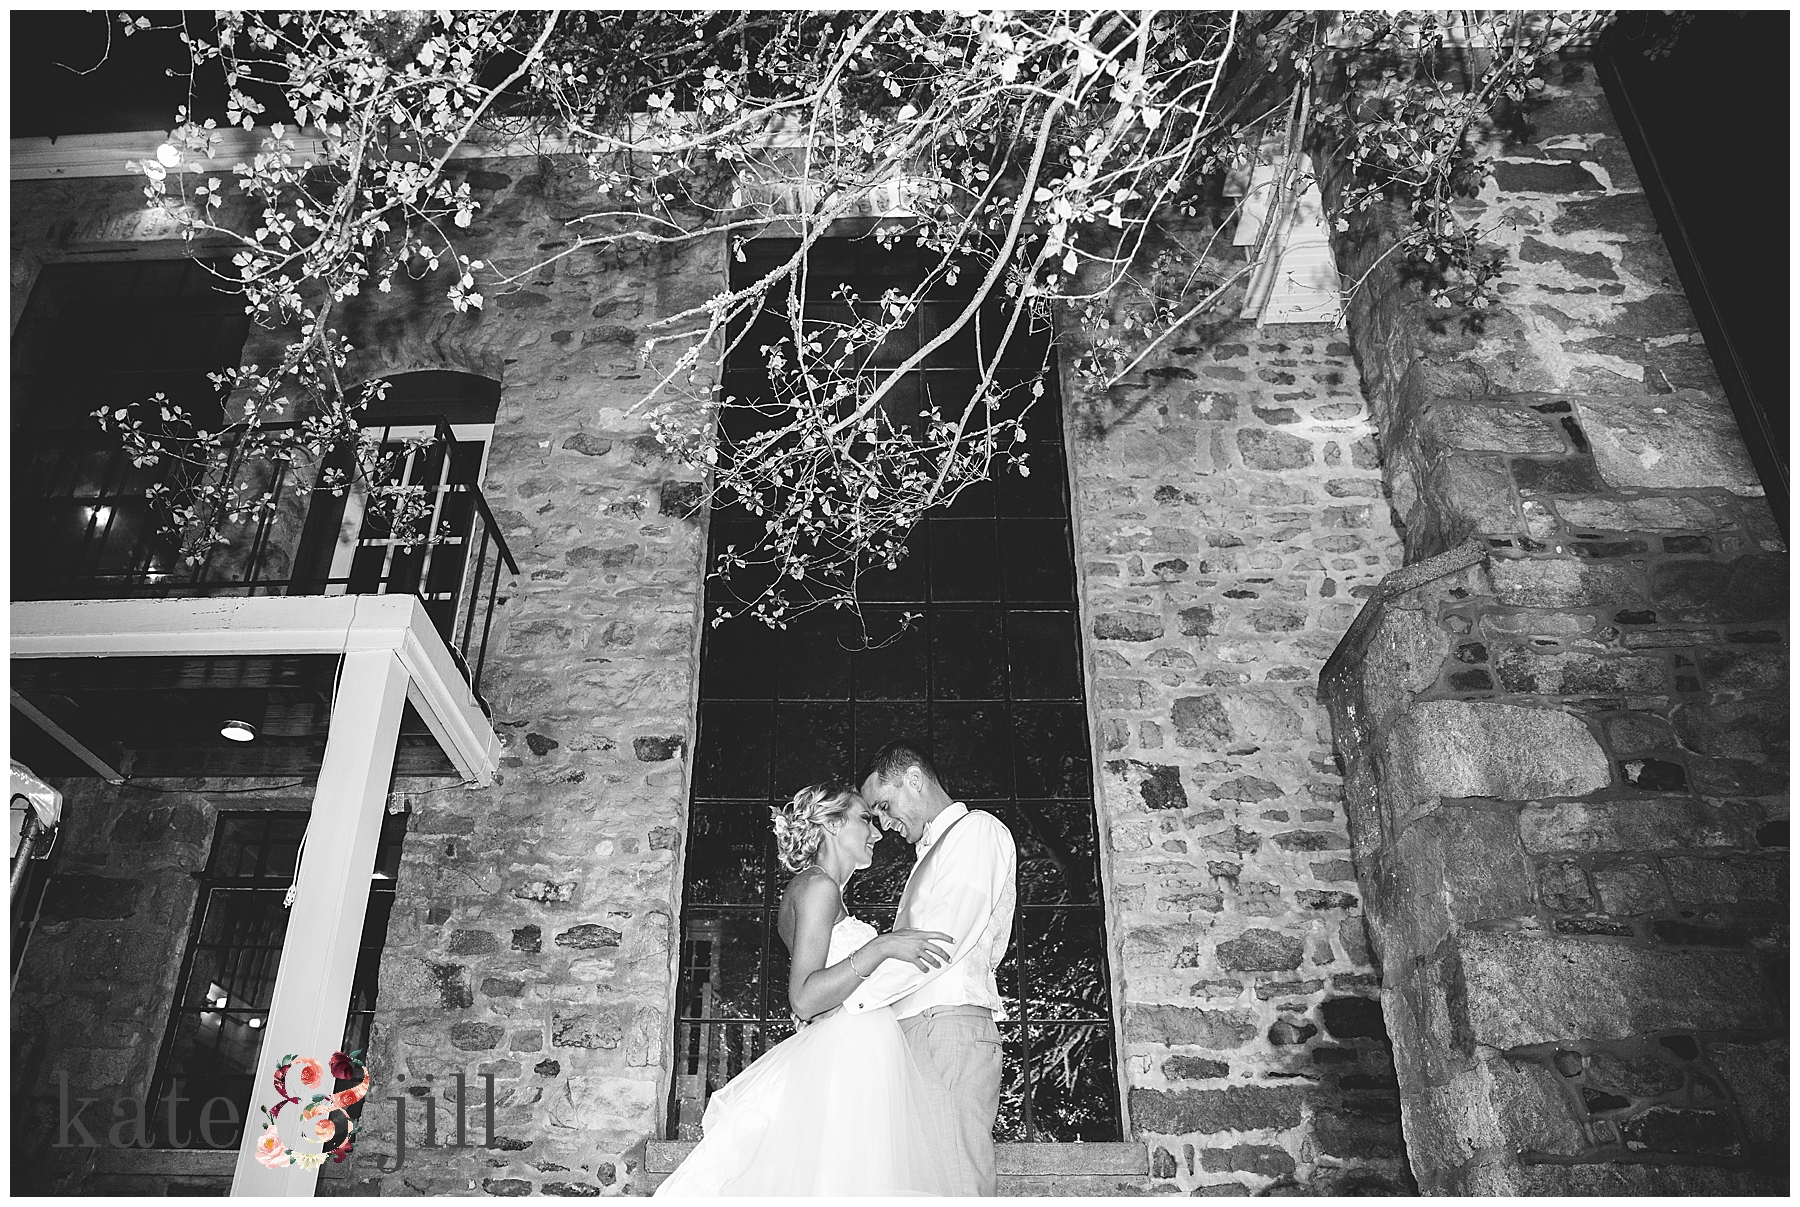 night photo of bride and groom outside venue